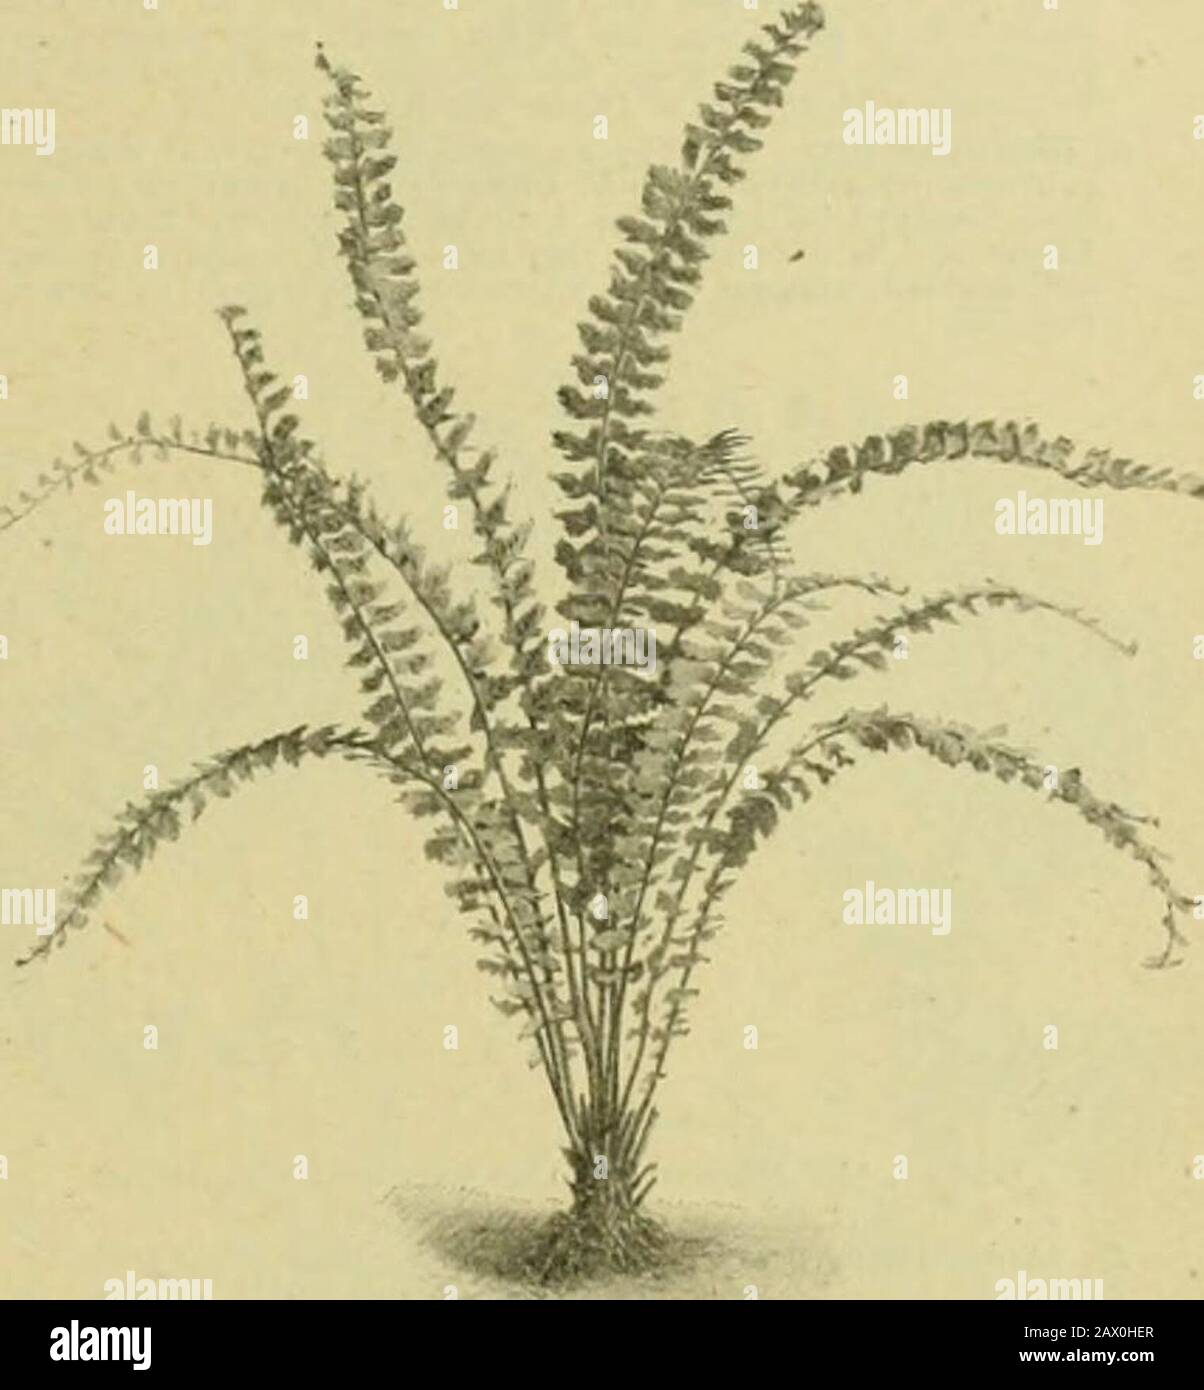 The century supplement to the dictionary of gardening, a practical and scientific encyclopaedia of horticulture for gardeners and botanists . Fig. 115. Frond op Asplenium liETERocAuruM. Asplenimn — tonhHuecZ. ^ft-^^^^^ita.^.. Fig. 116. Asplenium incisum. A. incisnin. The habit of this Japanese and Chinese speciessomewhat resembles our British A. lanceolatum. See Fig. 116.iSYN. ..1. elcgantuhtm. A. japonicum (Japanese), rldz. slender, creeping, sti. straw-coloured, fronds 9in. to 15in. long, 4in. to 6in. broad; pinmeeight to ten, papery, bright gieen, cut down in the lower partinto close, oblon Stock Photo